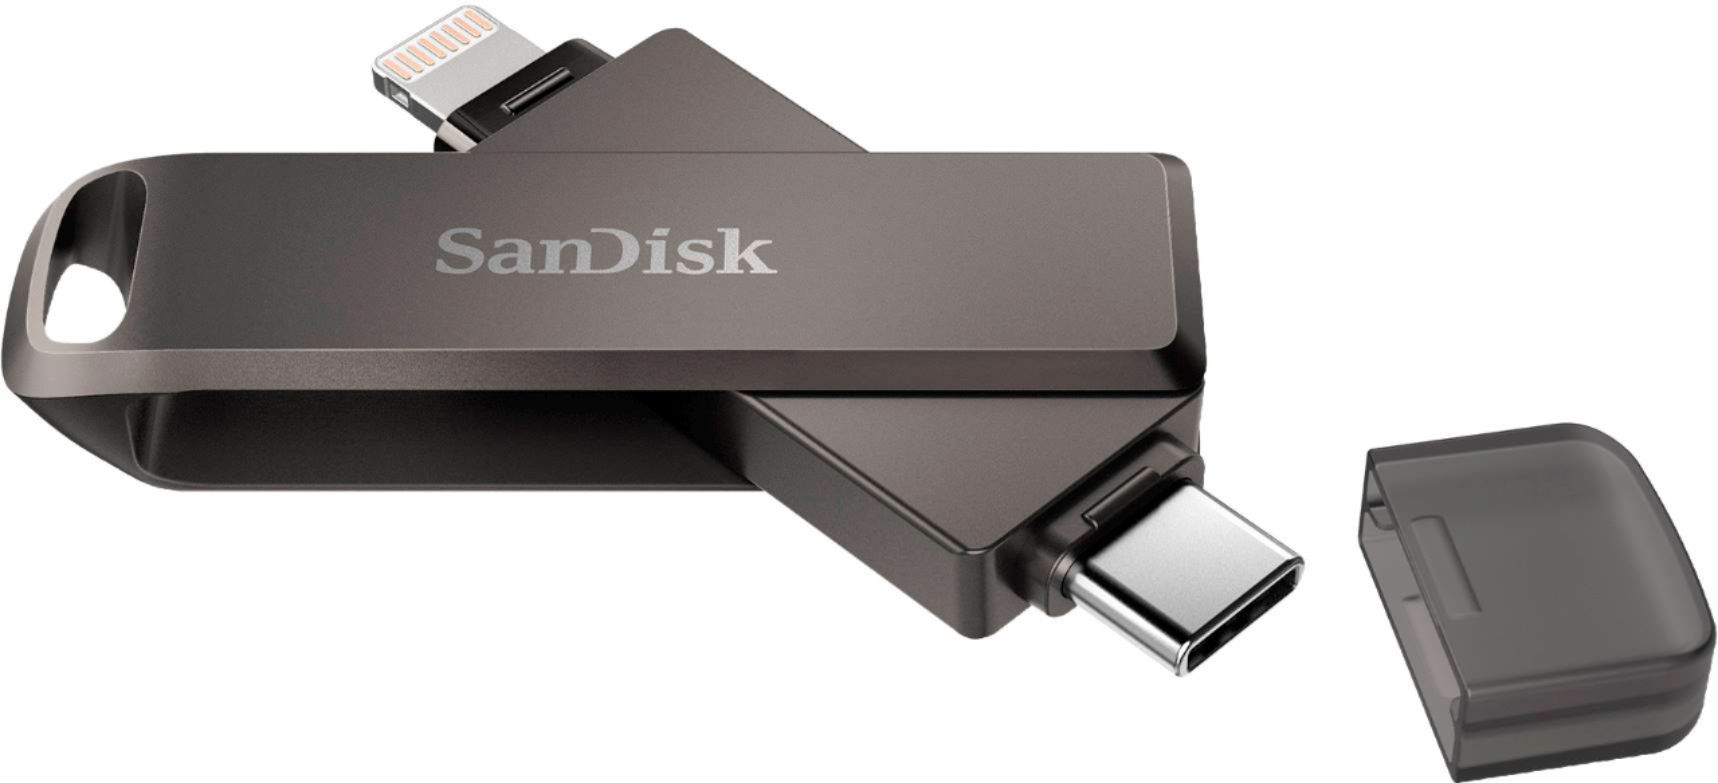 SanDisk 256GB iXpand Phone Drive Luxe for iPhone Lightning and